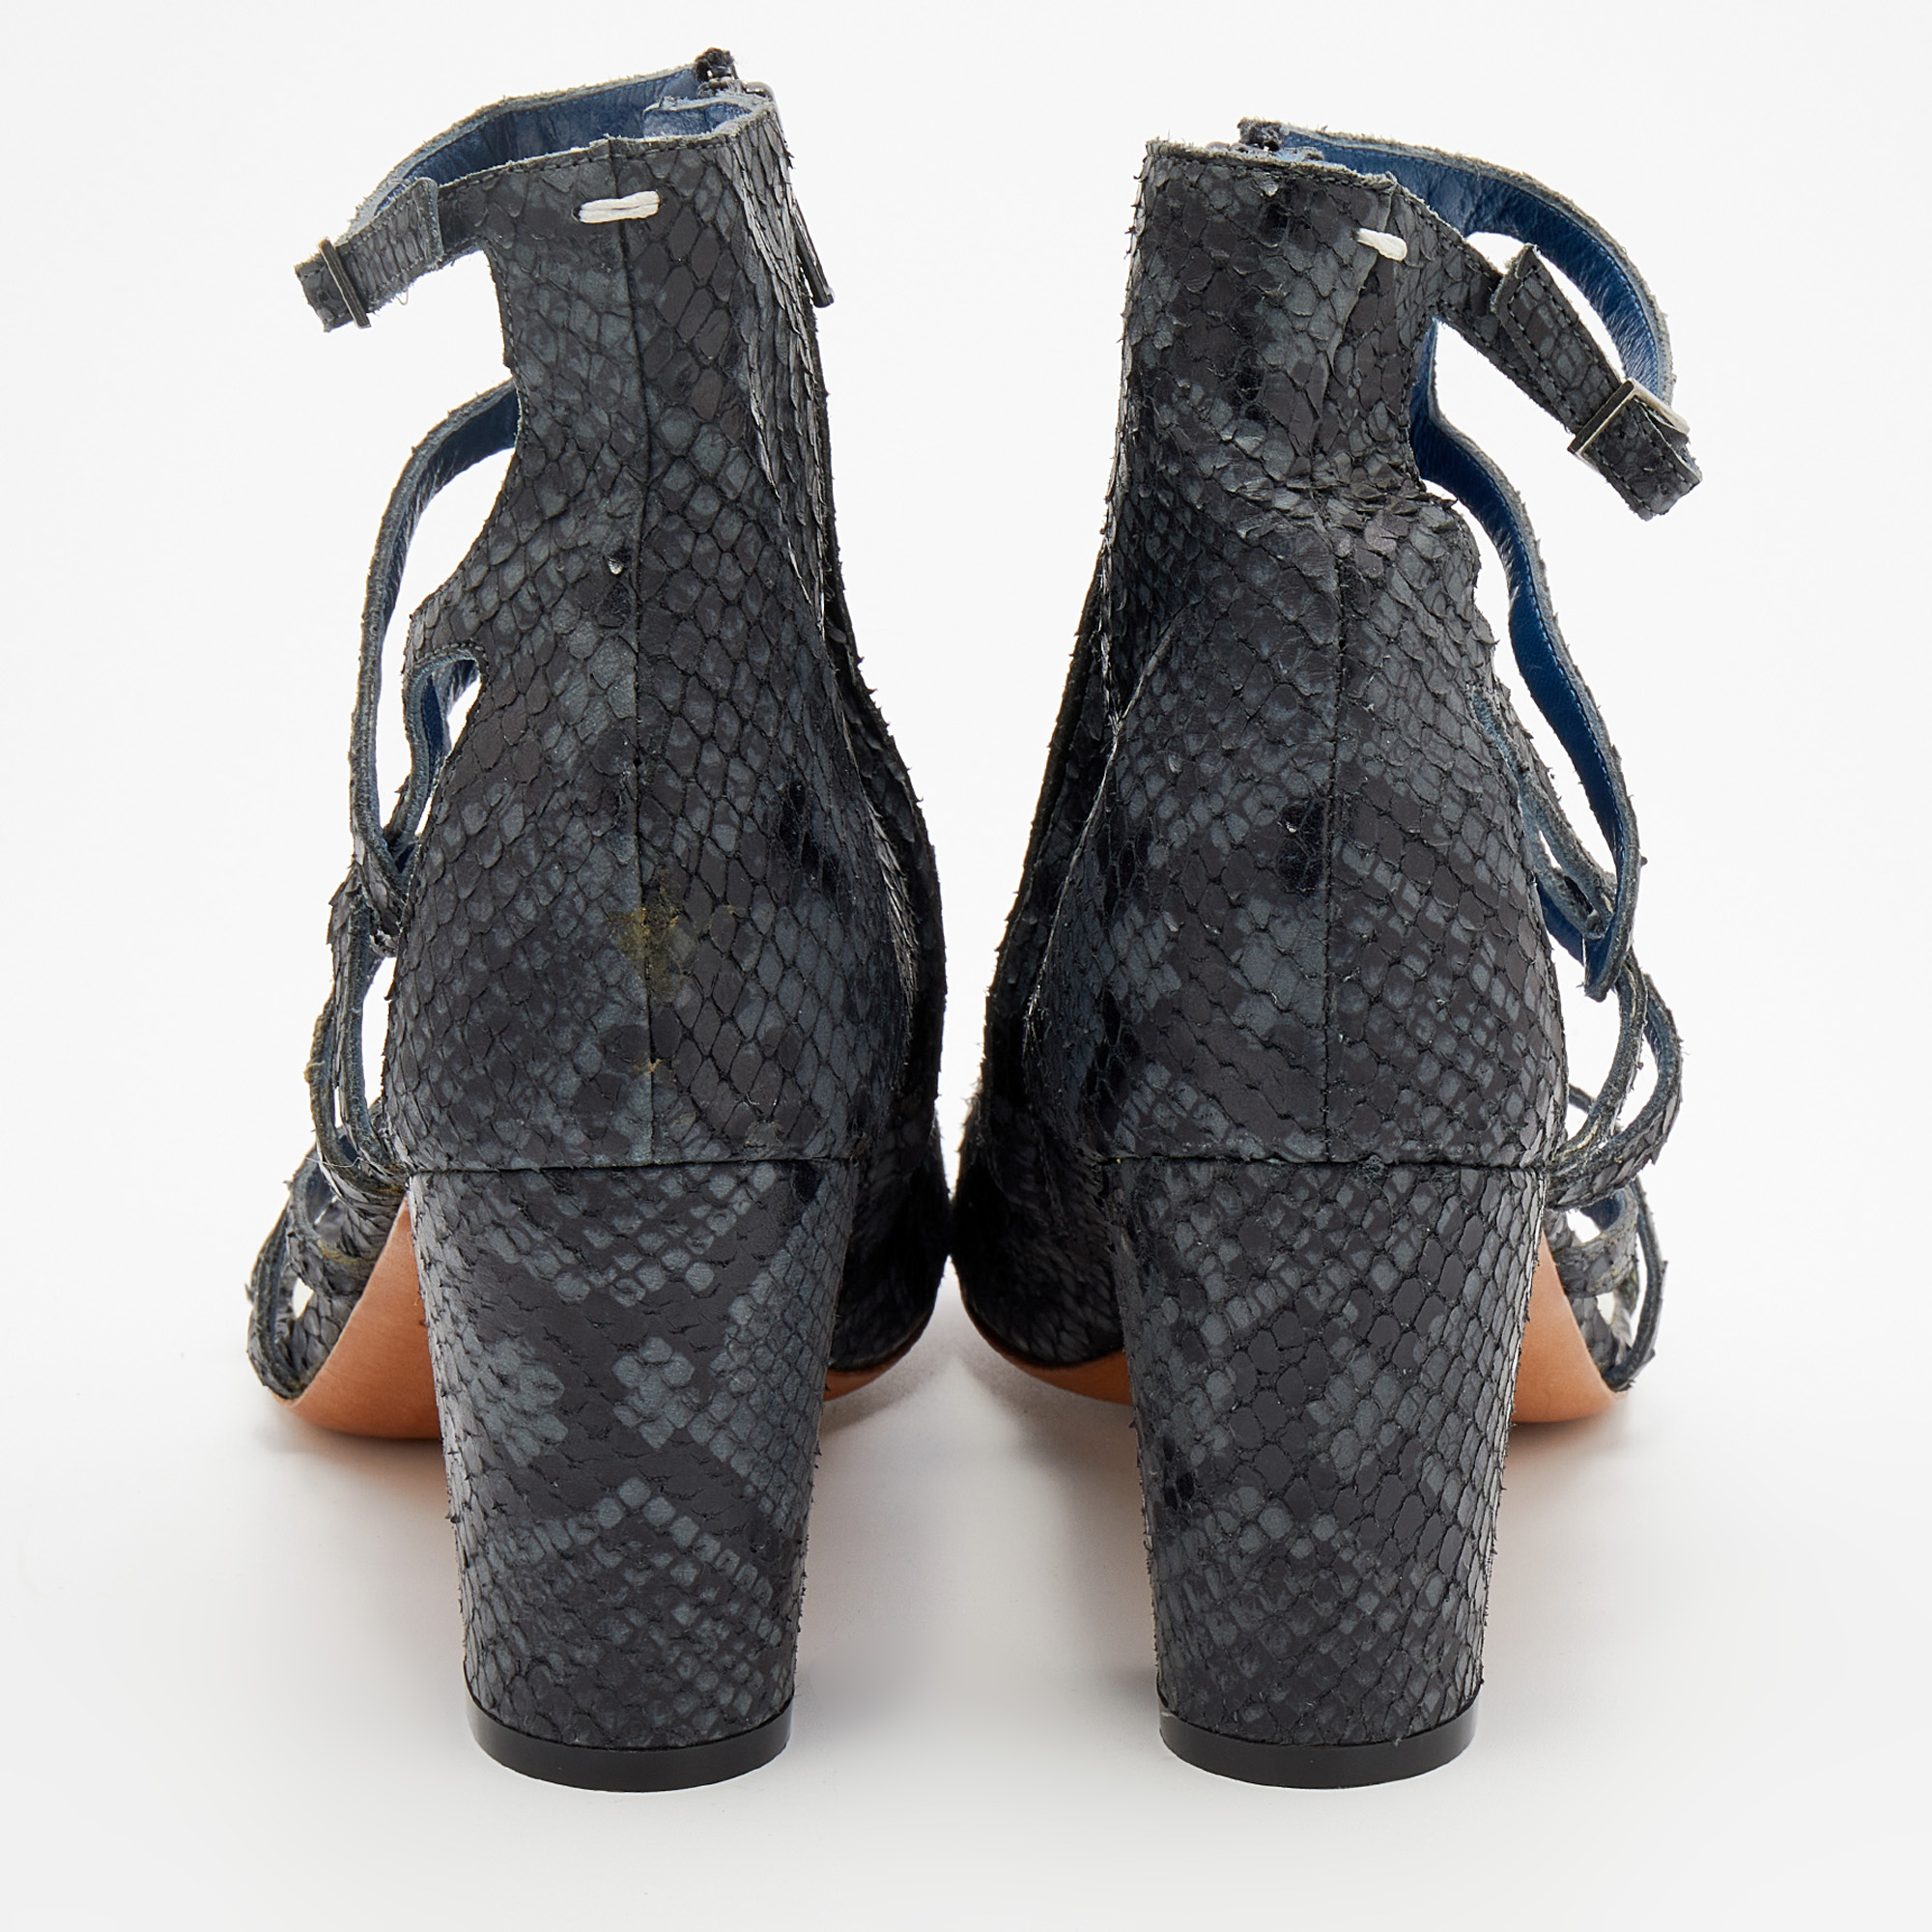 Maison Martin Margiela Grey/Black Python Embossed Leather Strappy Open Toe Booties Size 40